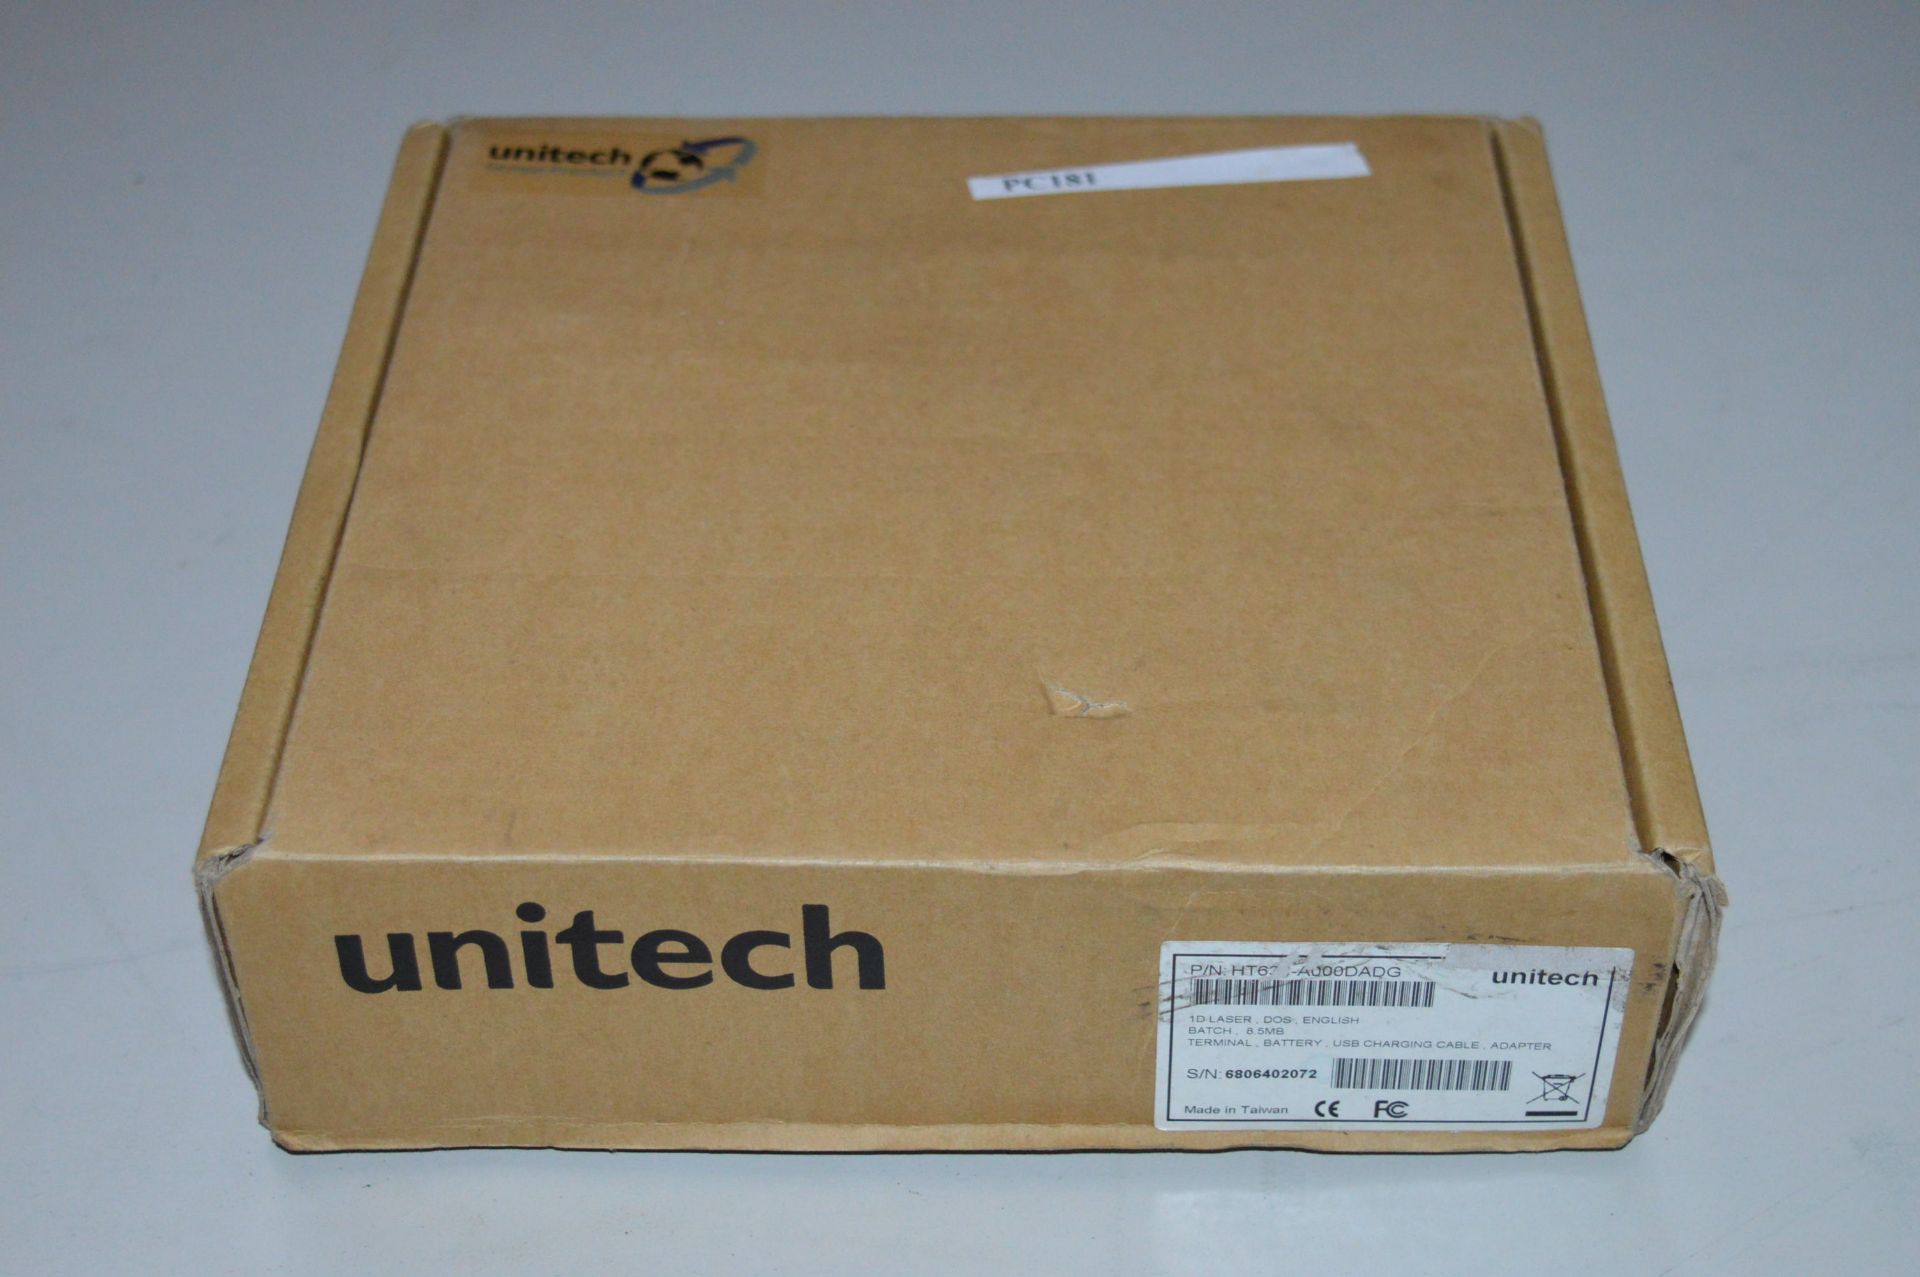 1 x Unitech HT630 Data Terminal Barcode Scanner - RRP £500 - Excellent Condition WITH Box and - Image 6 of 6